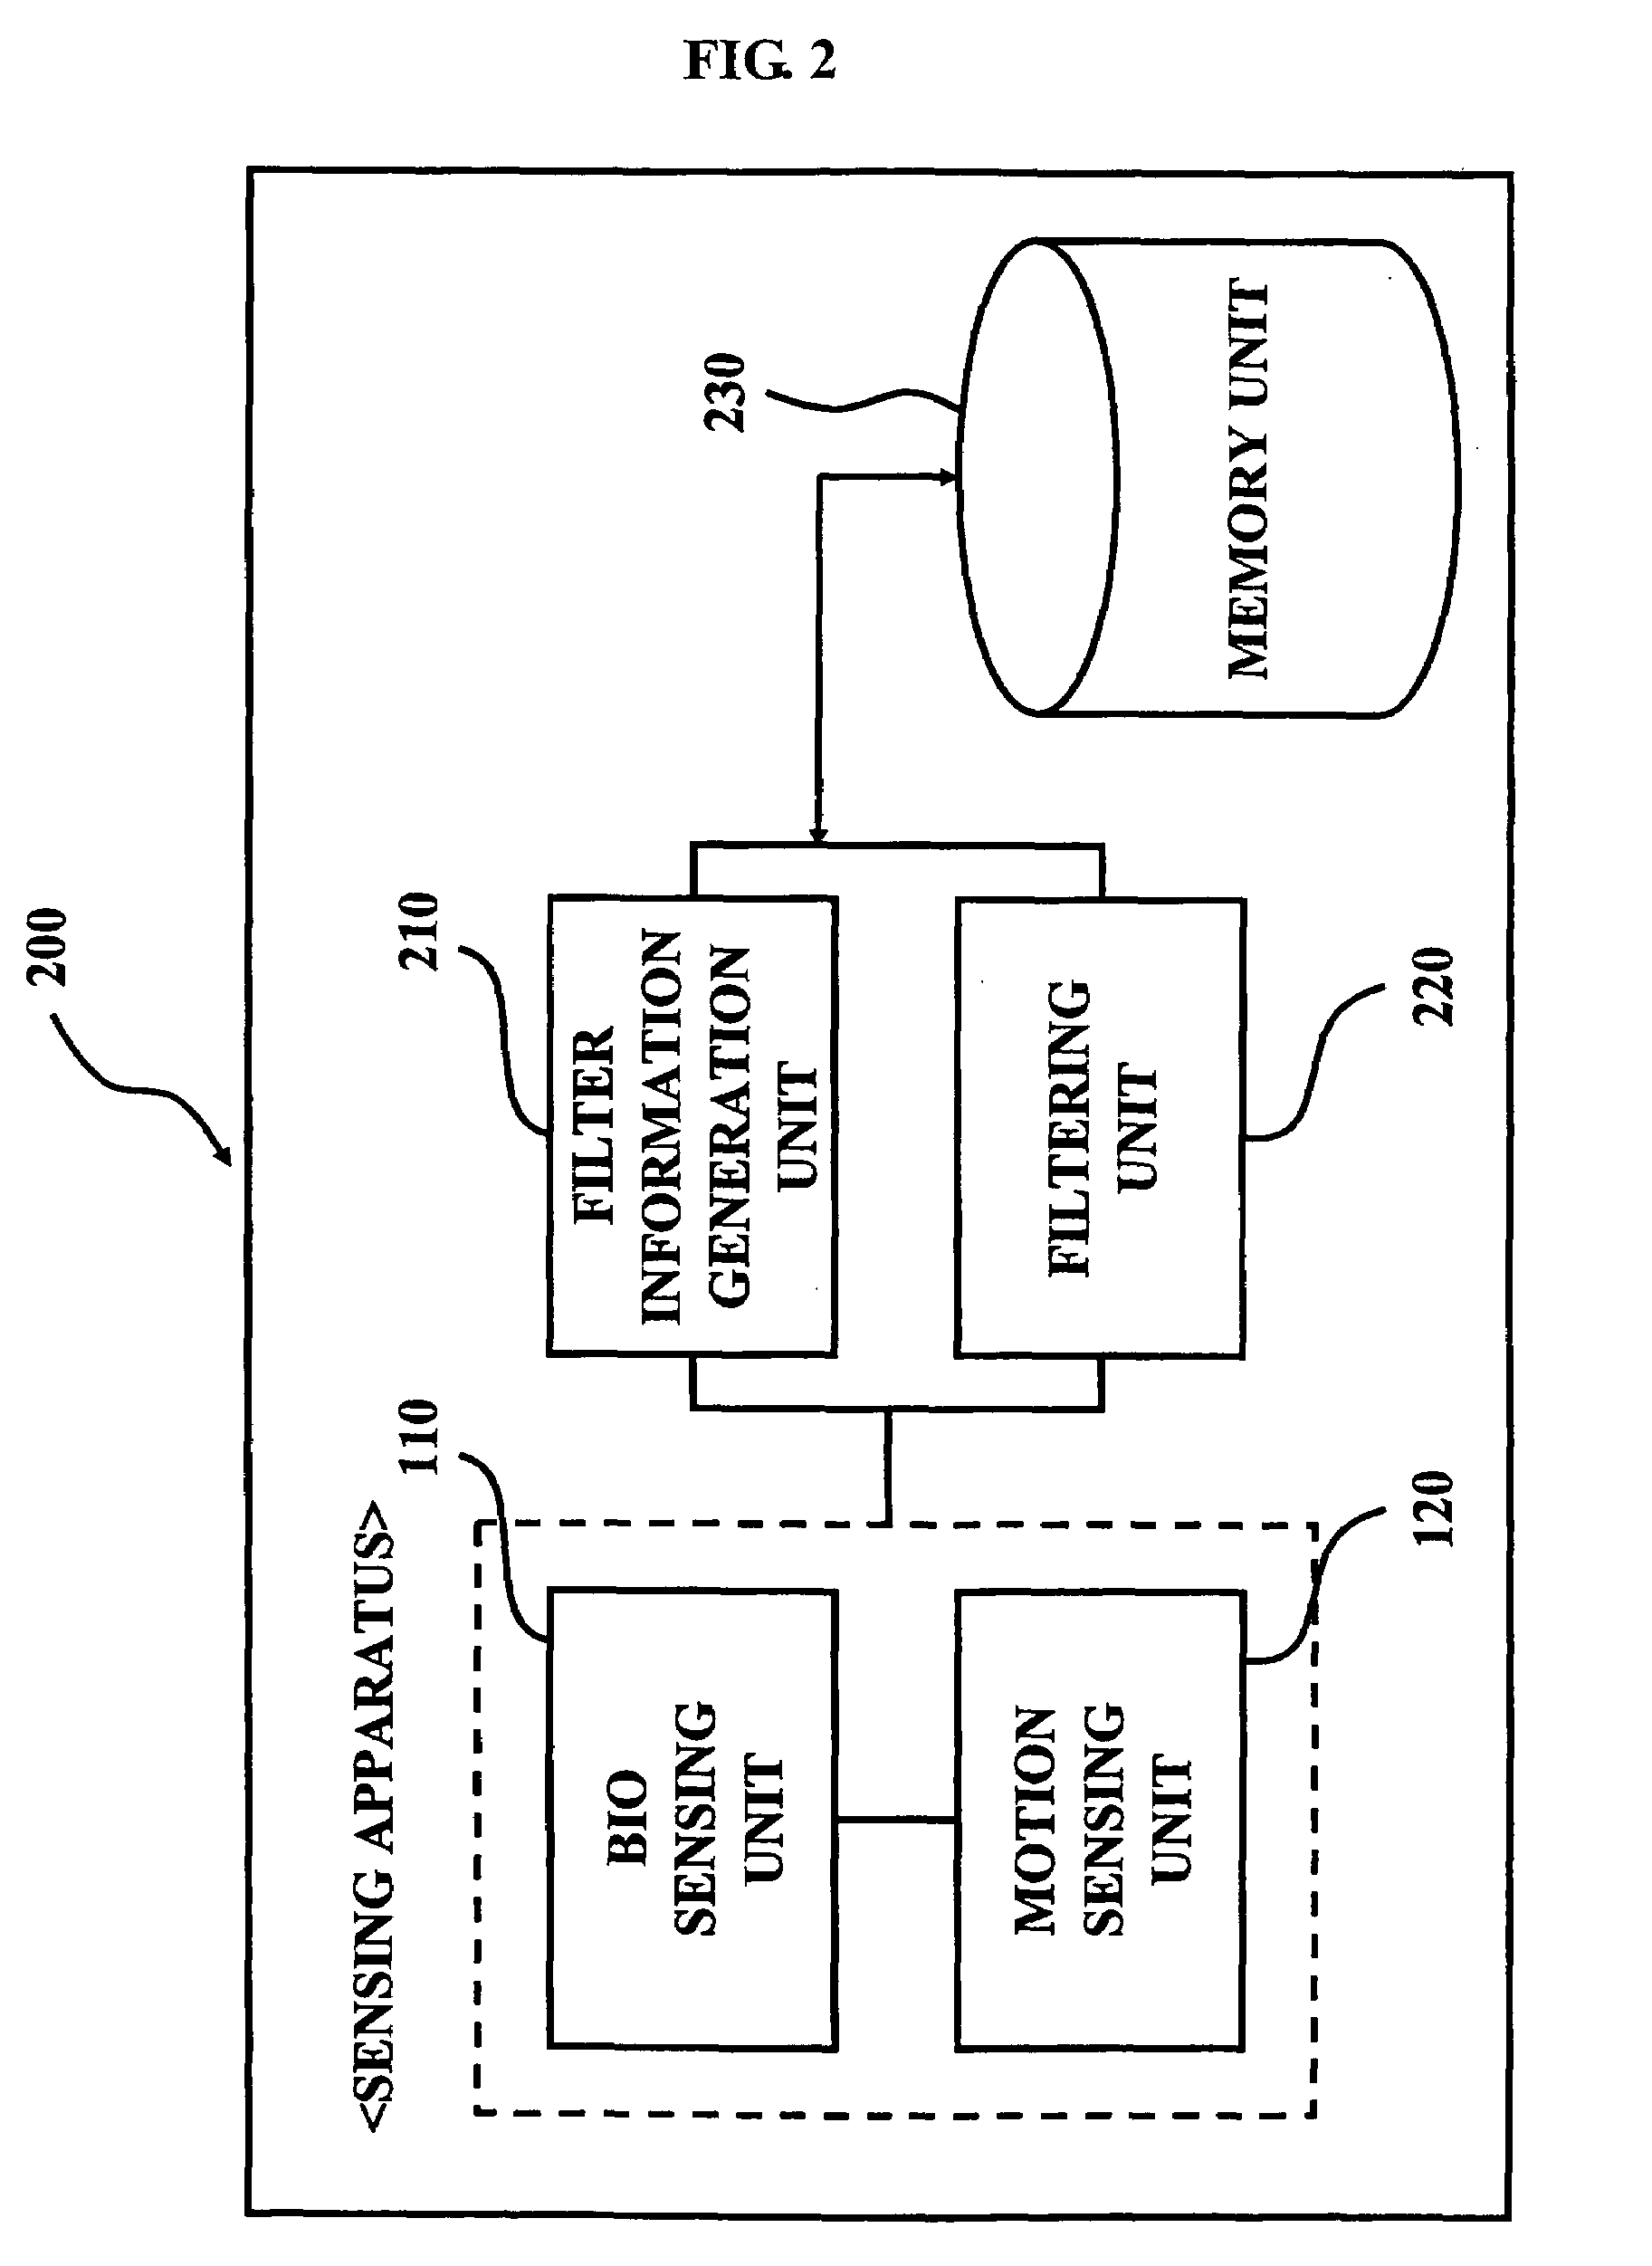 Method and system for removing noise by using change in activity pattern